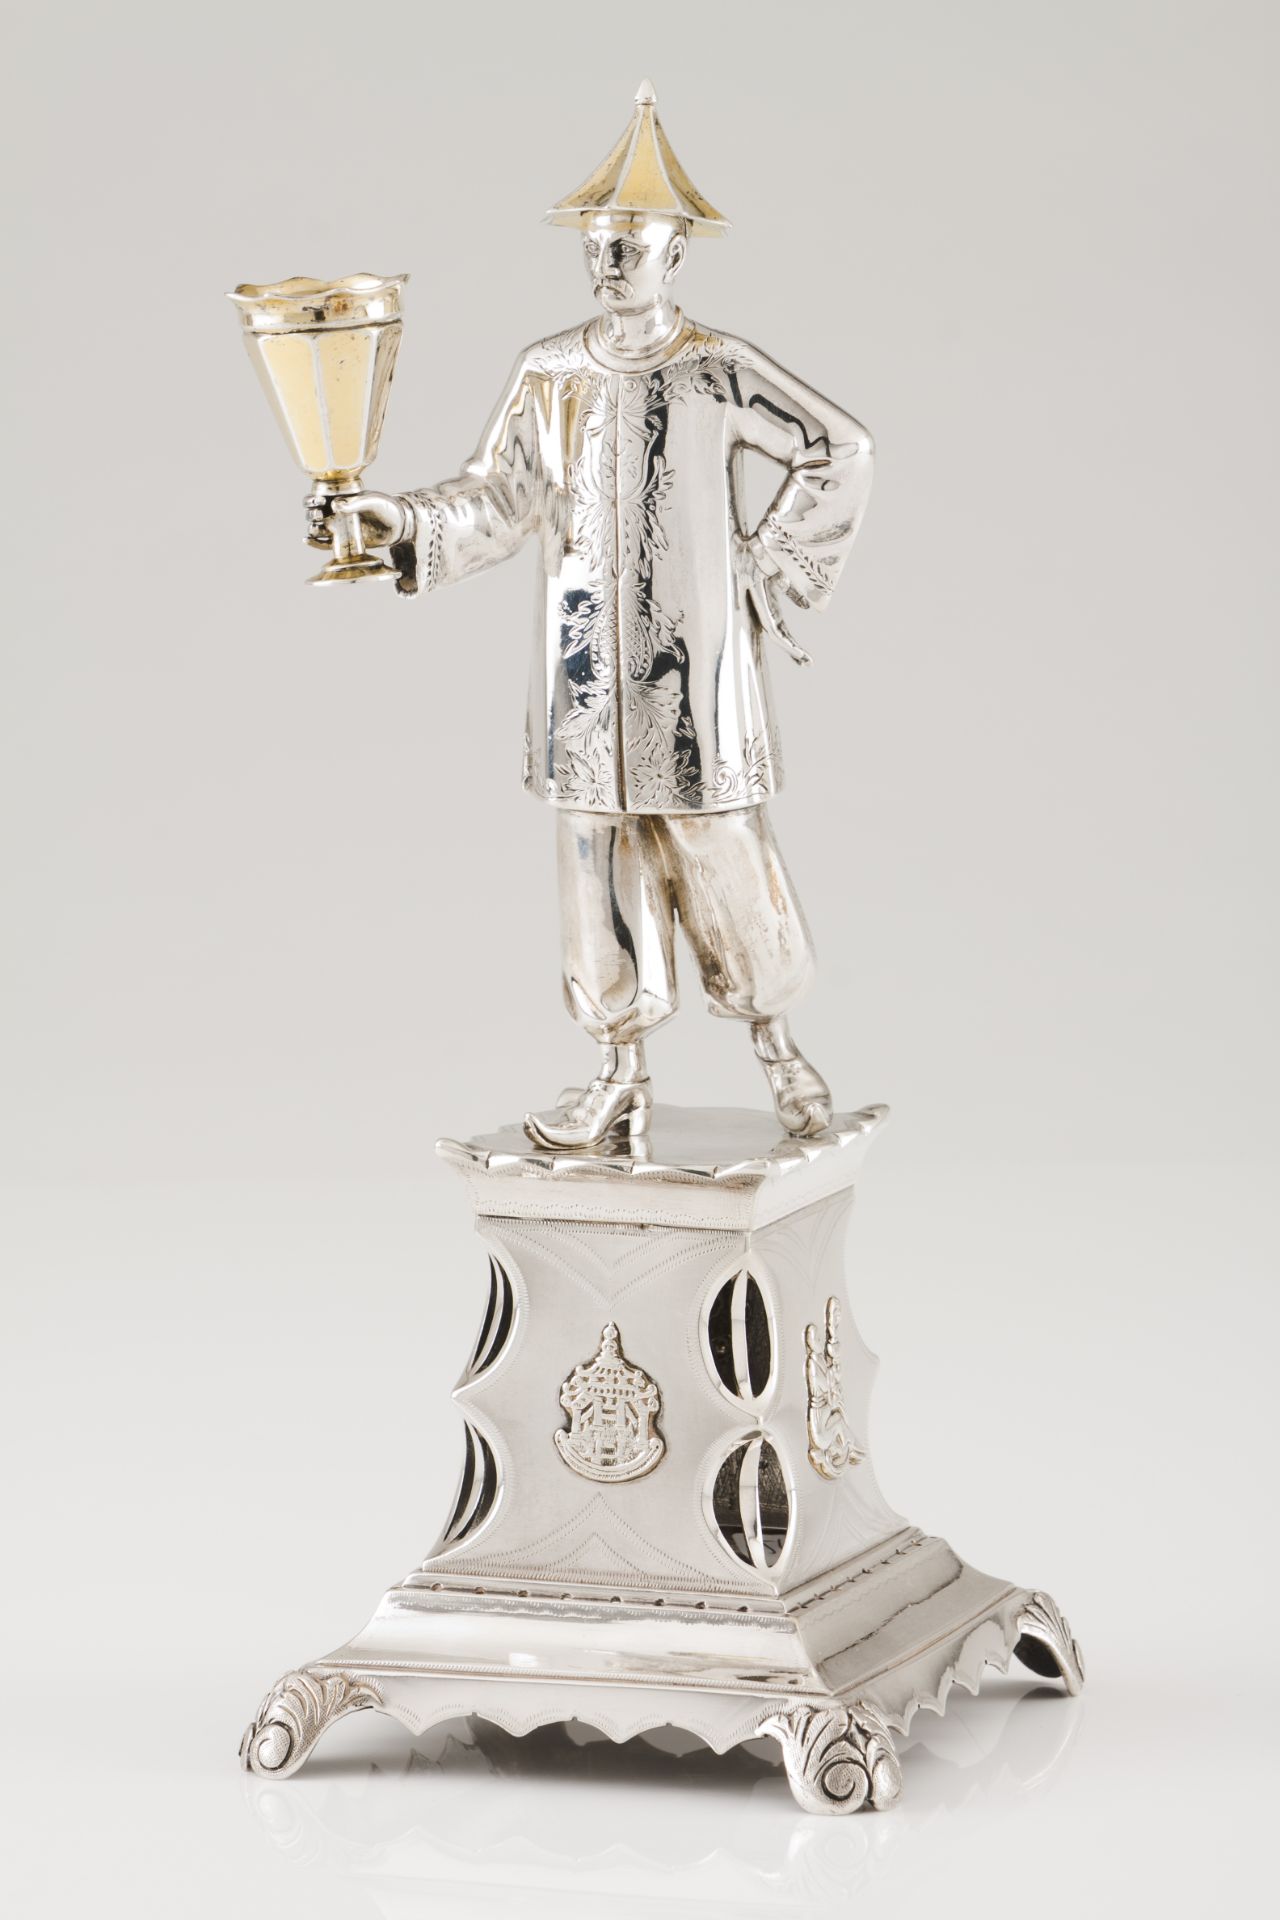 A toothpick holderPortuguese silver, 19th century Chinese figure holding bowl on a raised sand